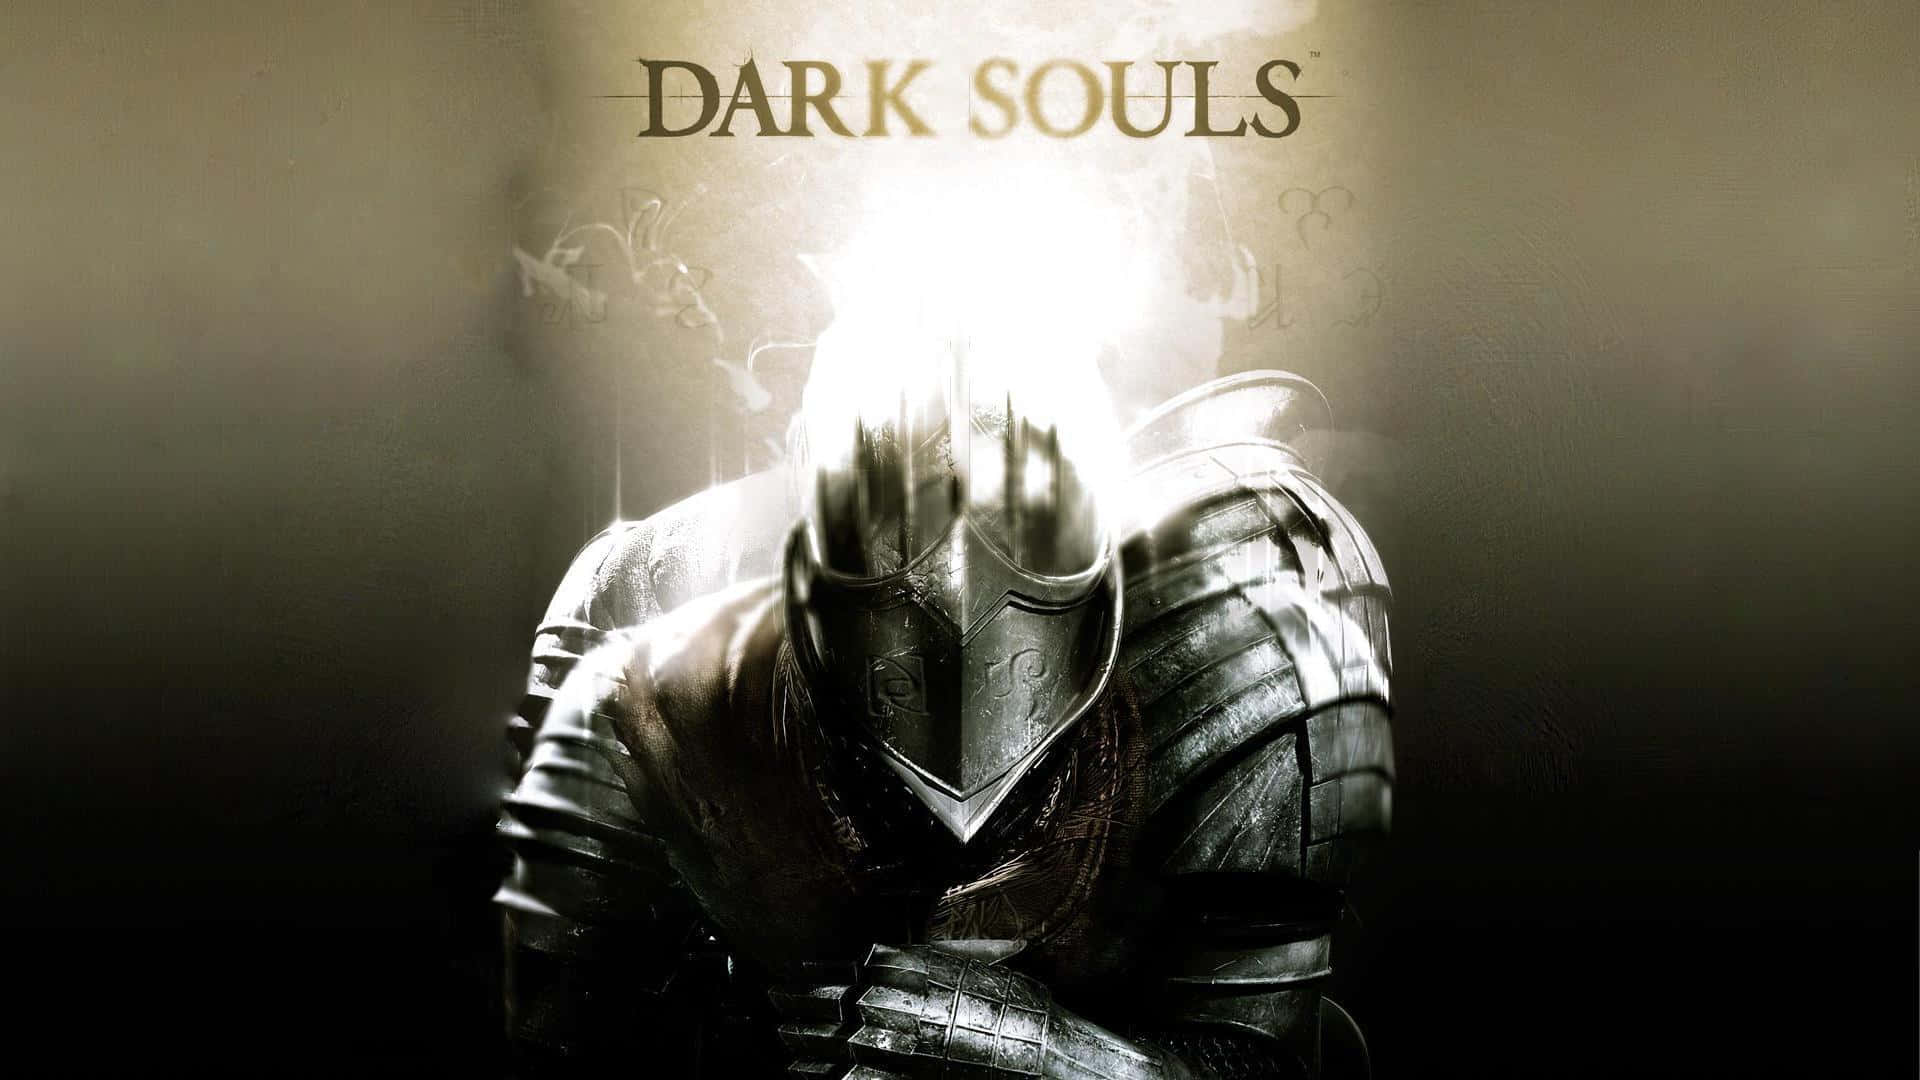 Action-packed adventure in the fantasy world of Lordran.